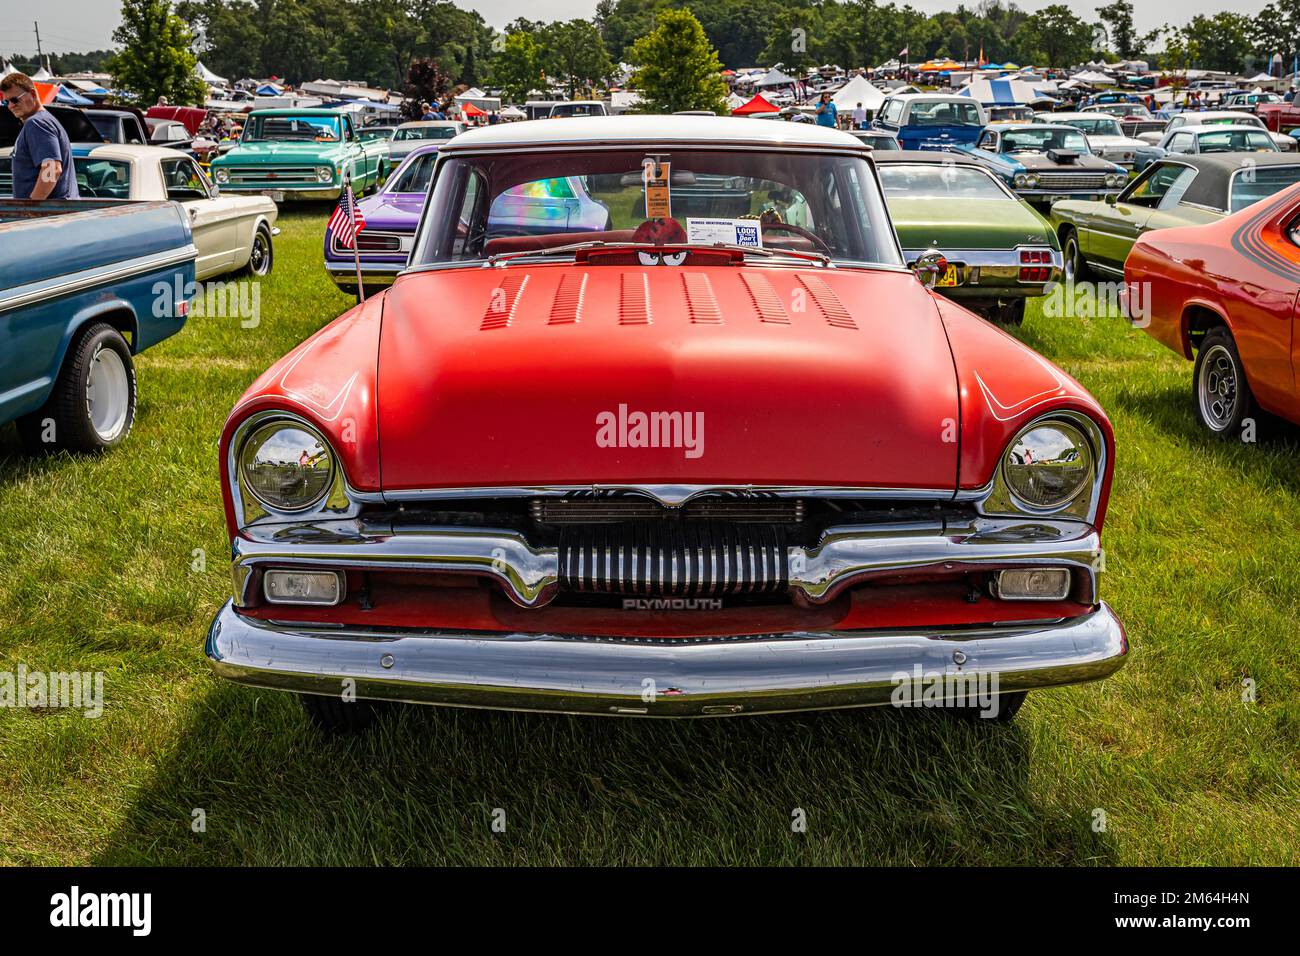 Iola, WI - July 07, 2022: High perspective front view of a 1955 Plymouth Belvedere 2 Door Sedan at a local car show. Stock Photo